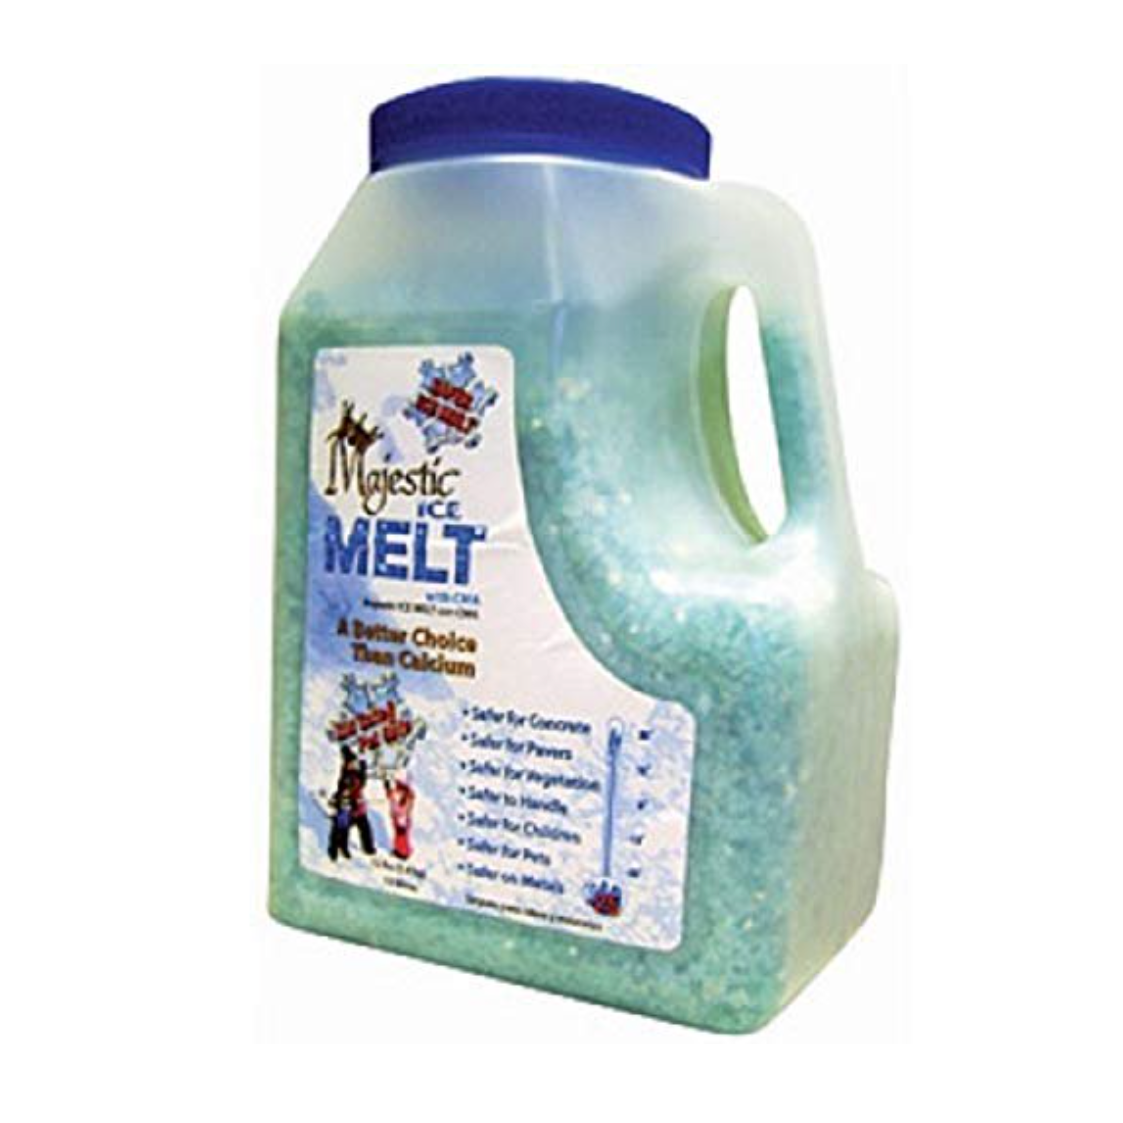 Majestic Ice melt shaker pour bottle for ice and snow removal